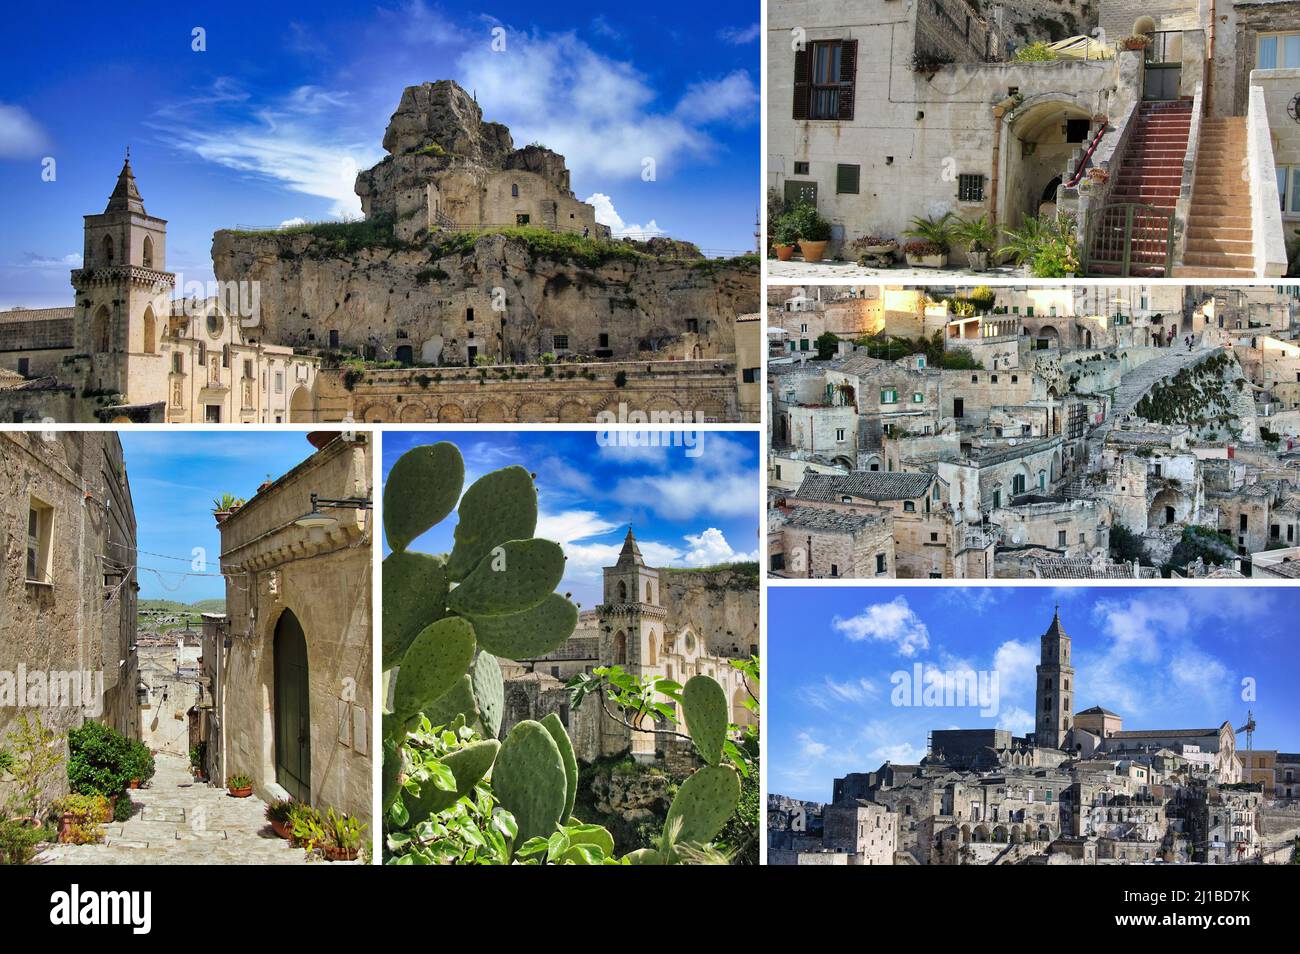 Matera, a World Heritage Site, is one of the oldest cities in the world. In 2019 it was awarded the title of European Capital of Culture. Stock Photo